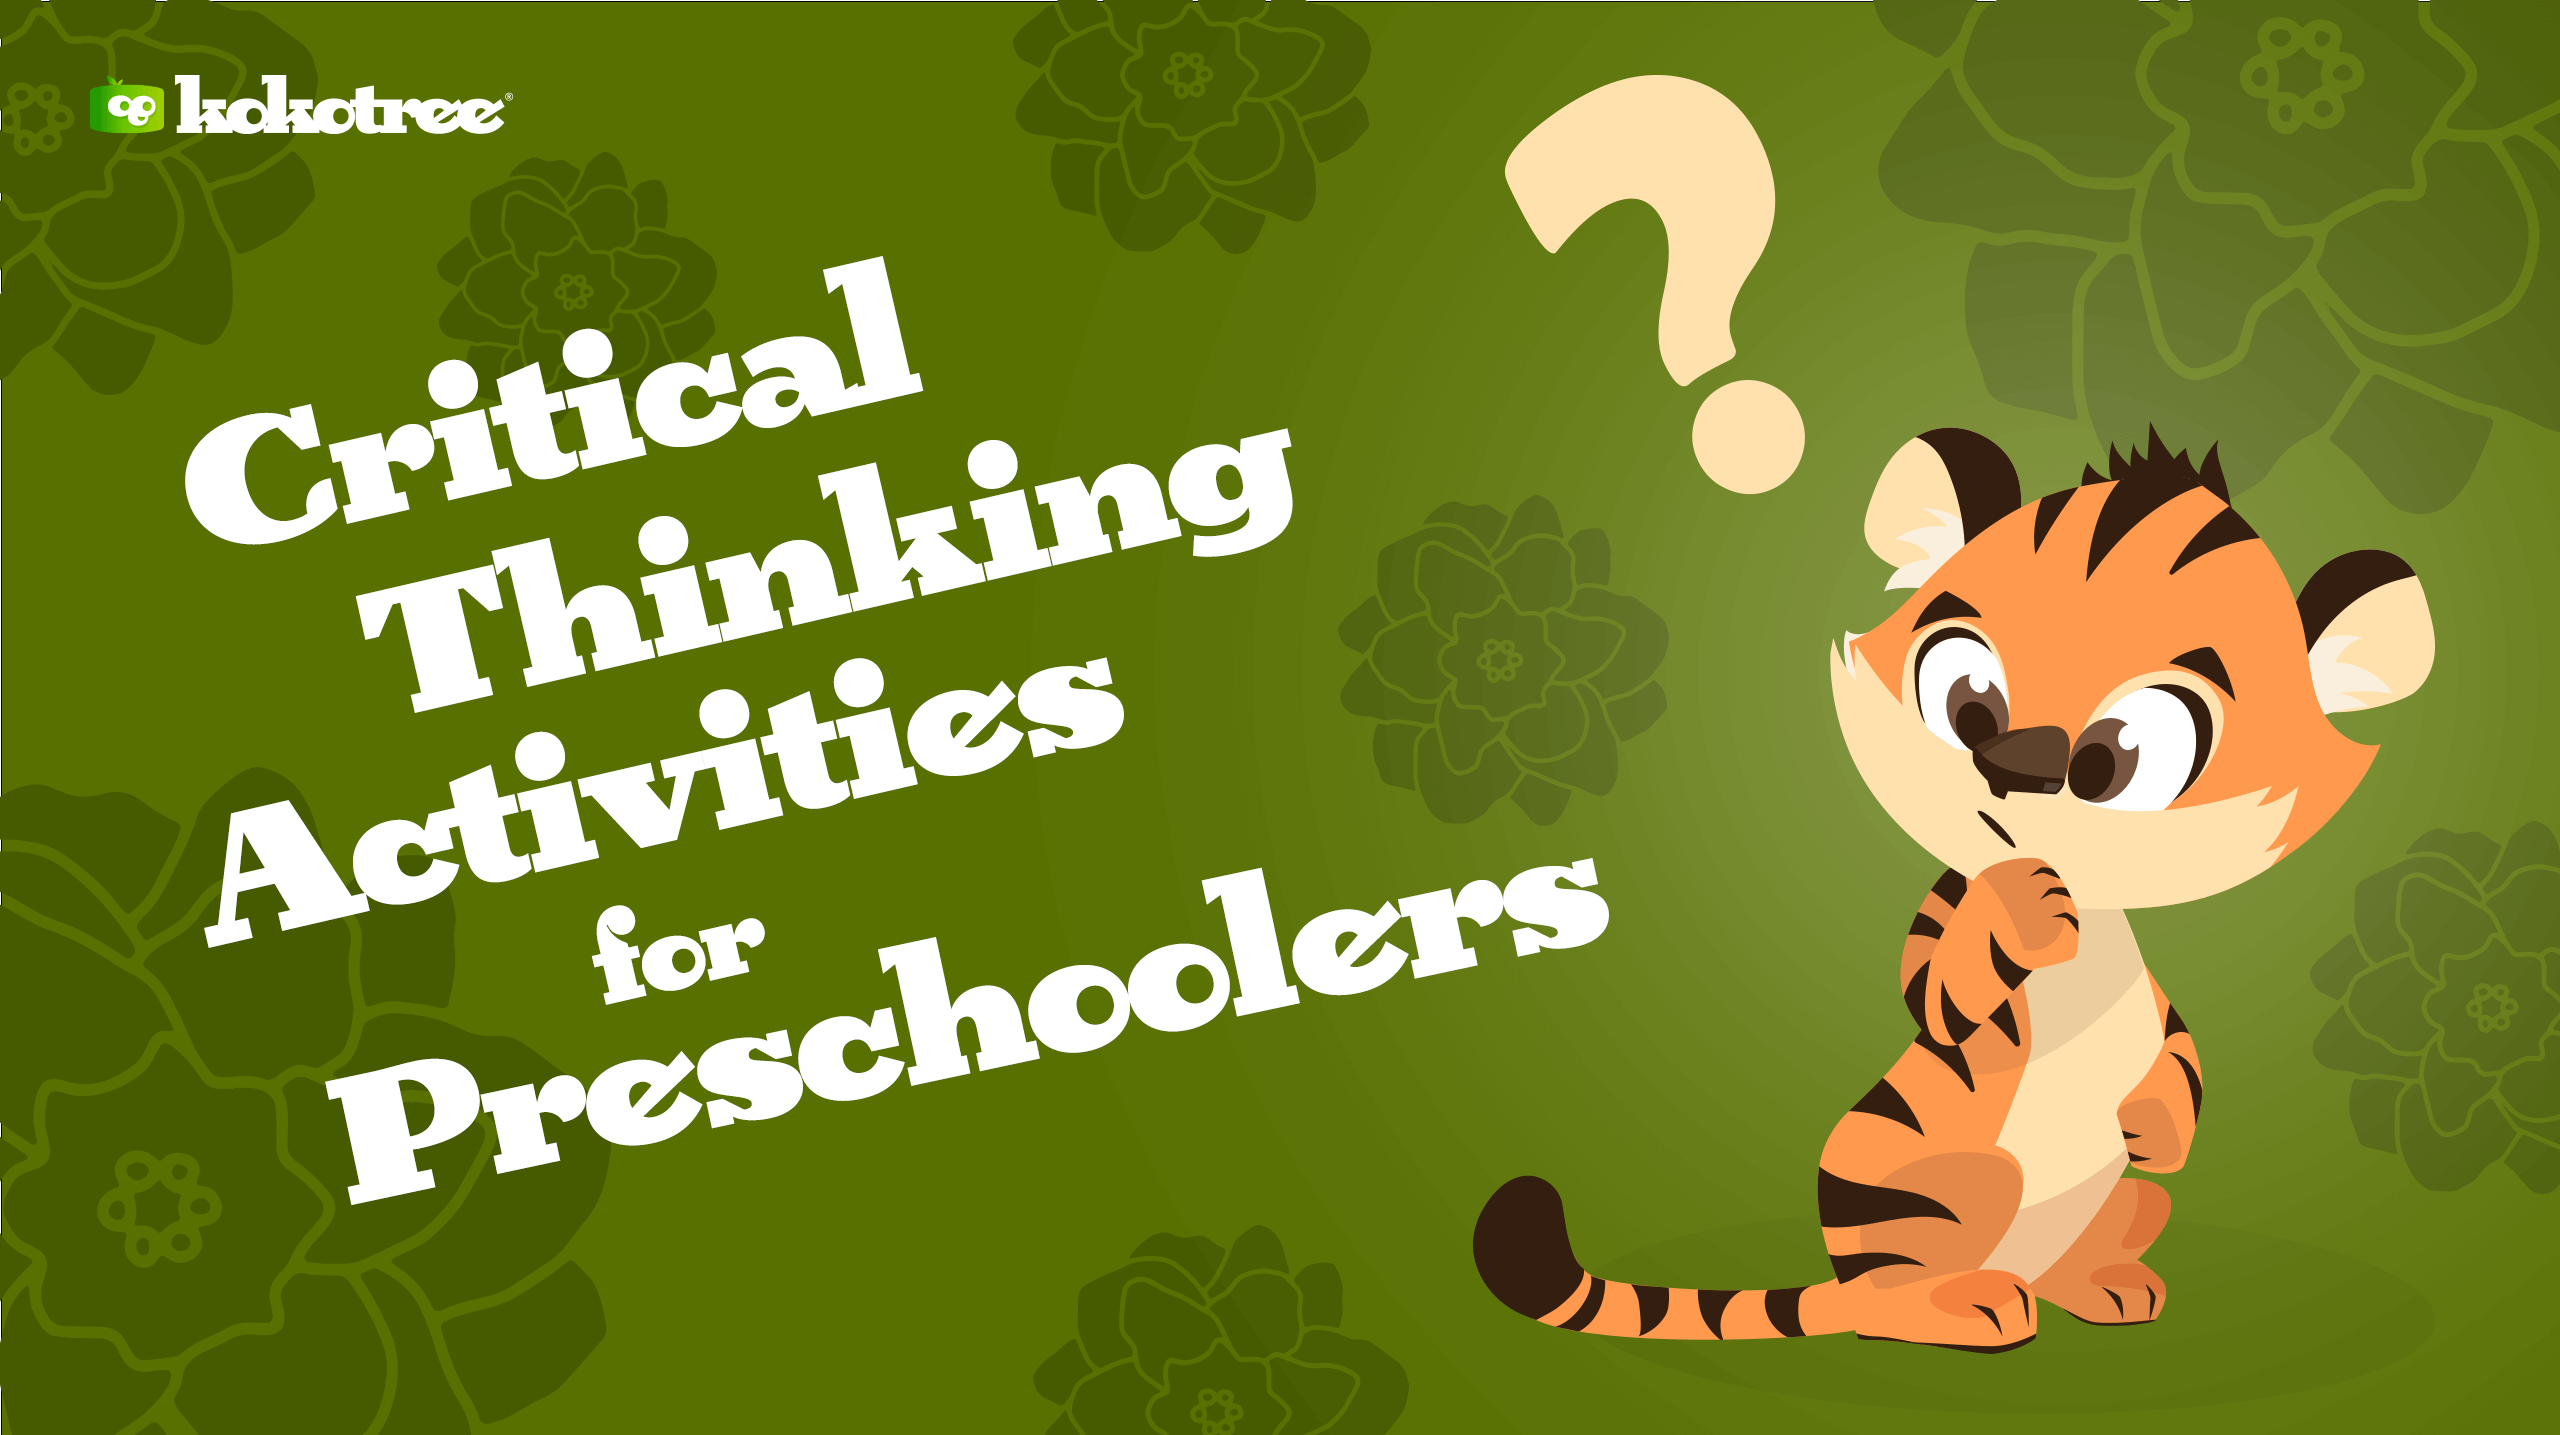 what is critical thinking skills for preschoolers